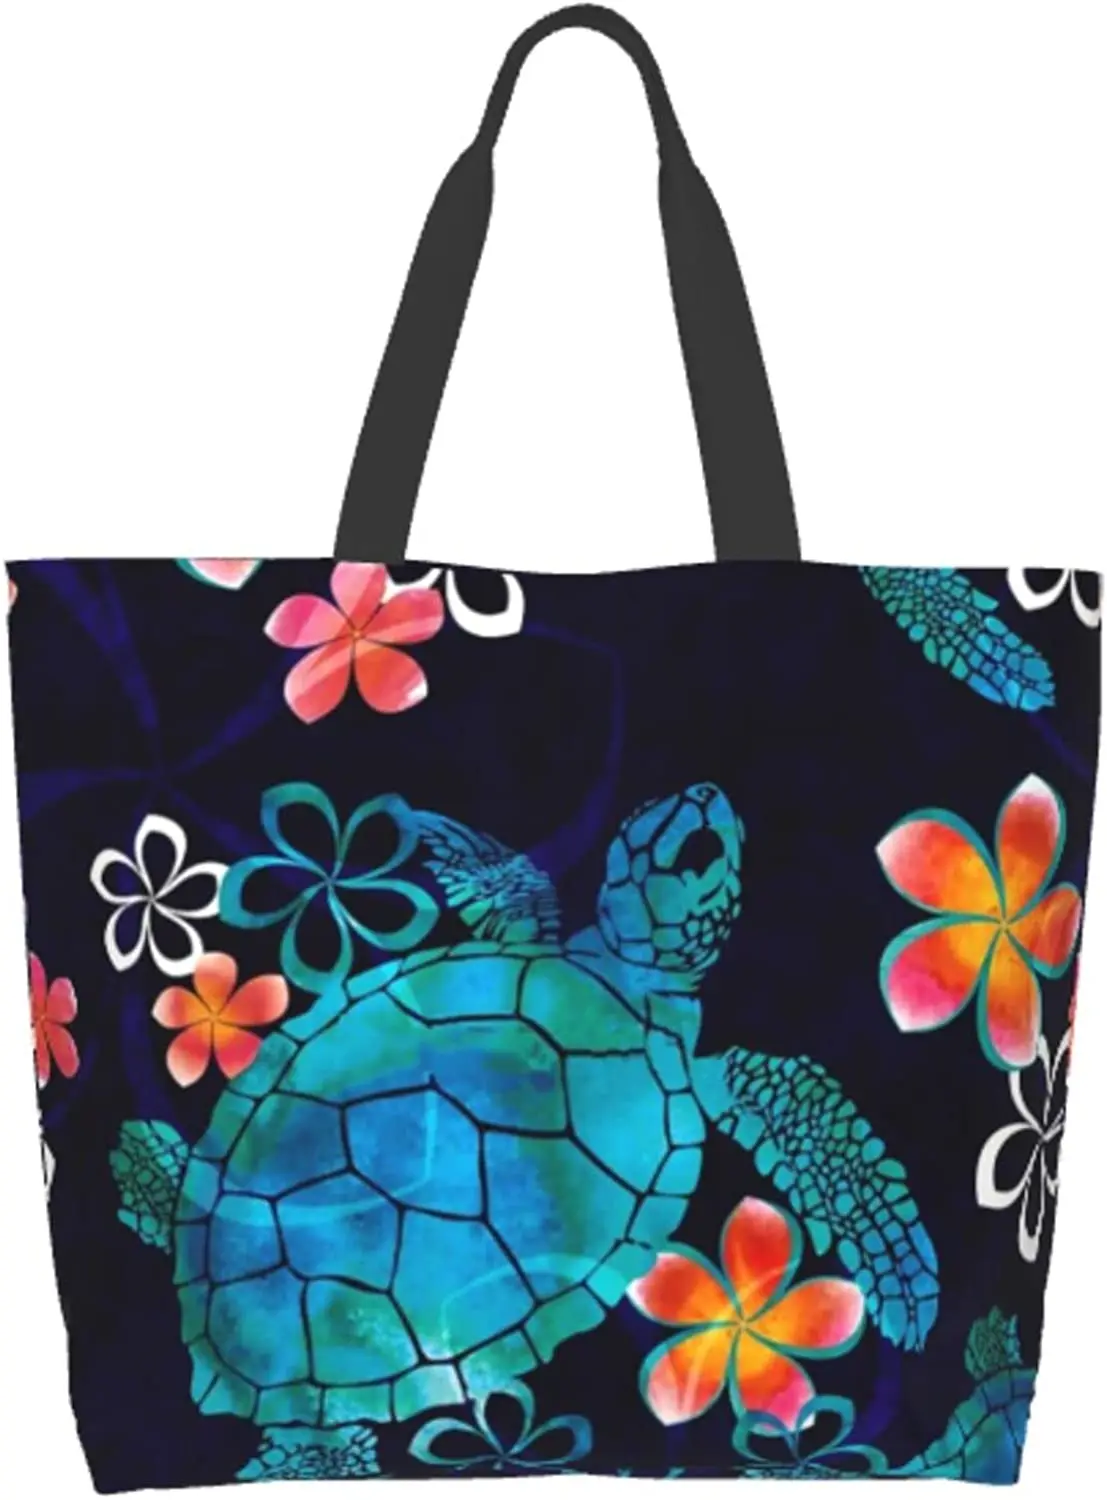 

Sea Turtles Floral Large Tote Bag For Women Reusable Grocery Bag Waterproof Shopping Handbag With Inner Pocket For Travel Work